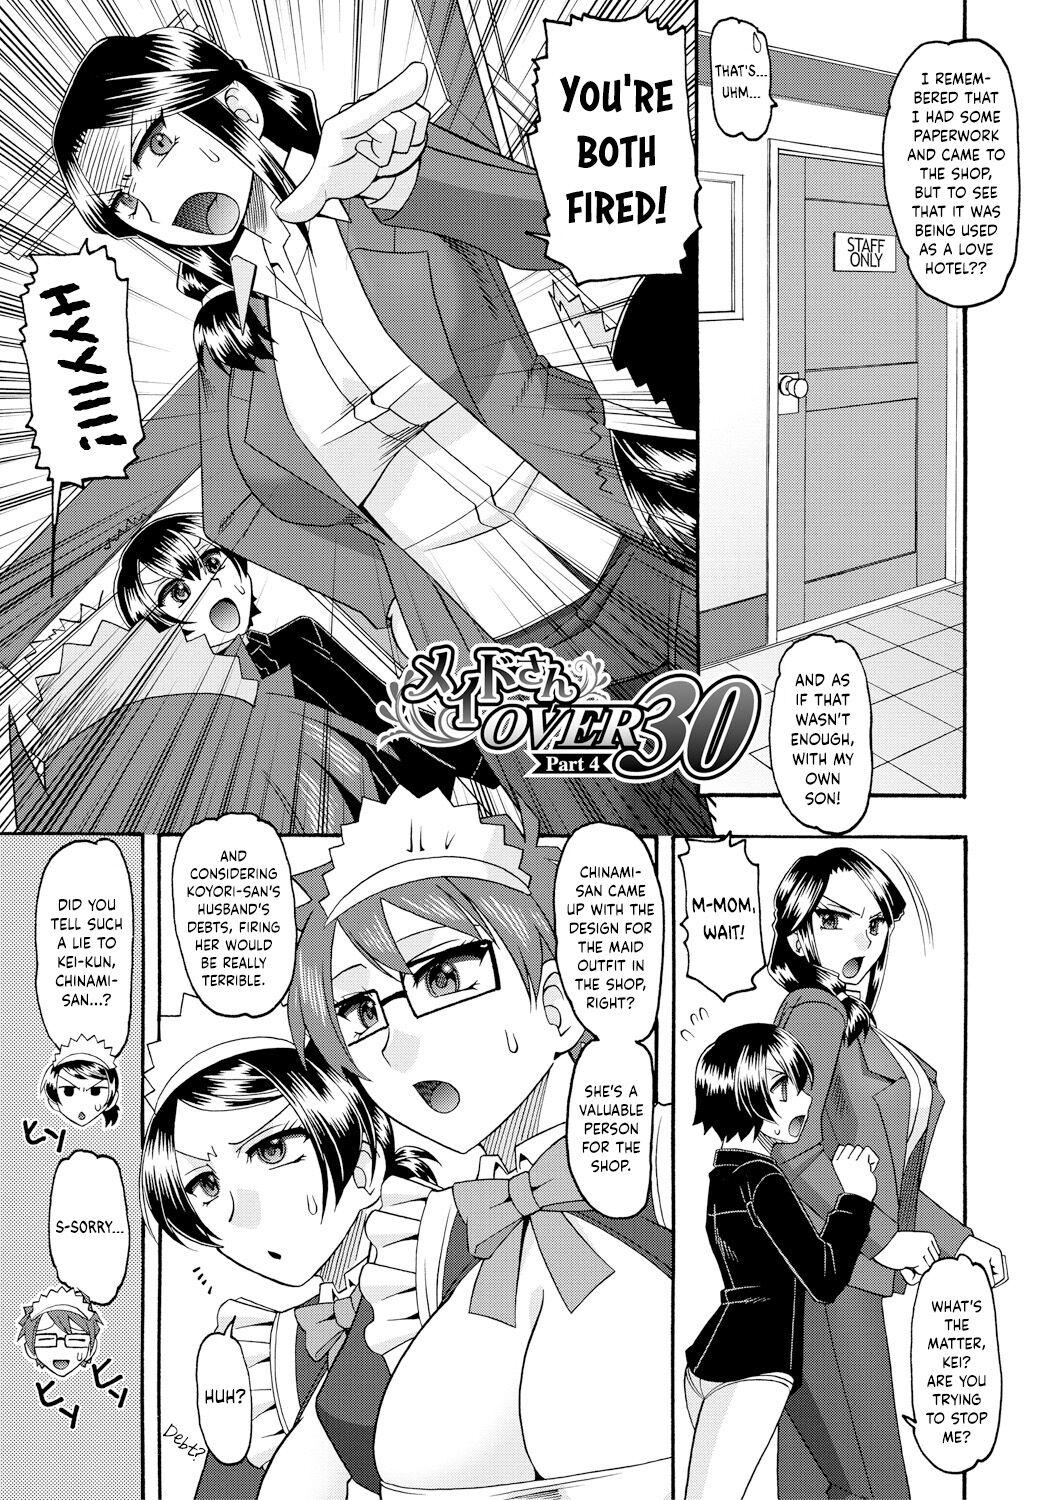 Maid OVER 30 Chapters 1-6 54